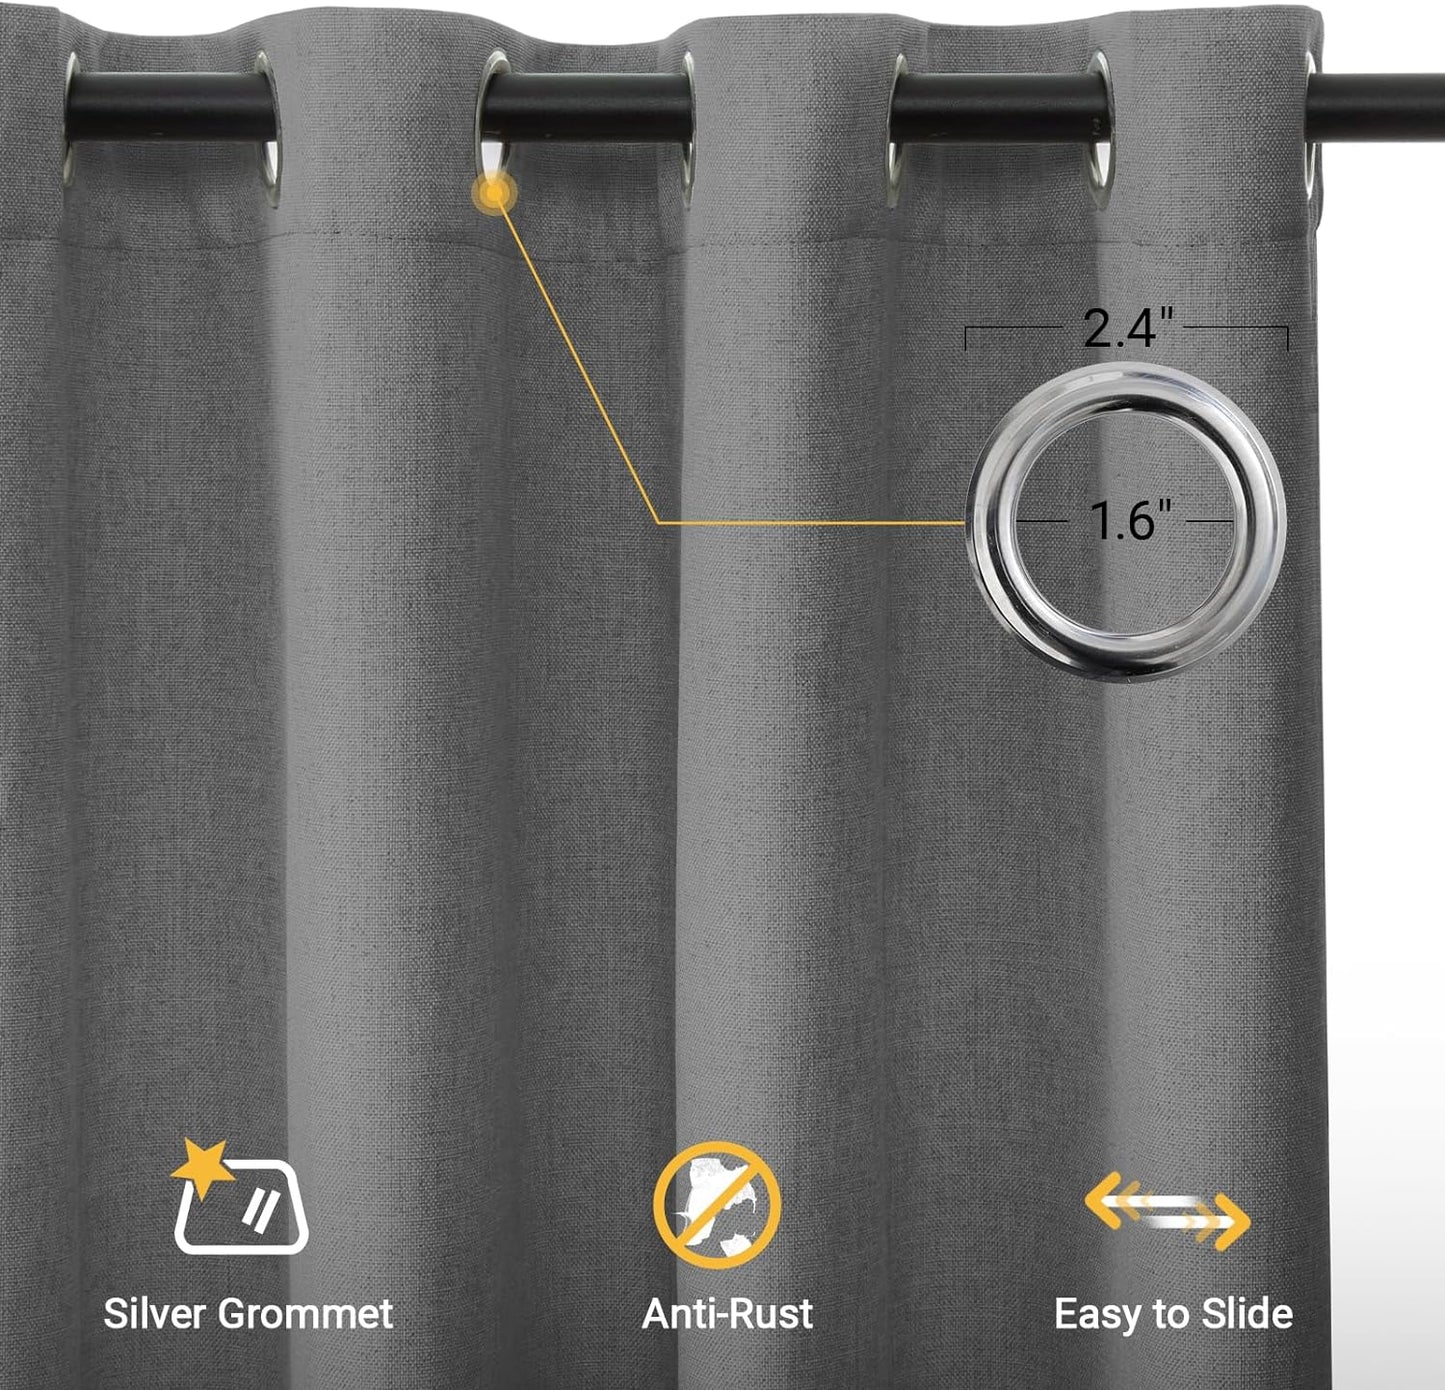 INOVADAY Blackout Curtains 63 Inch Length 2 Panels Set, Thermal Insulated Linen Blackout Curtains & Drapes Grommet Room Darkening Curtains for Bedroom Living Room- Dark Grey, W50 X L63  INOVADAY   